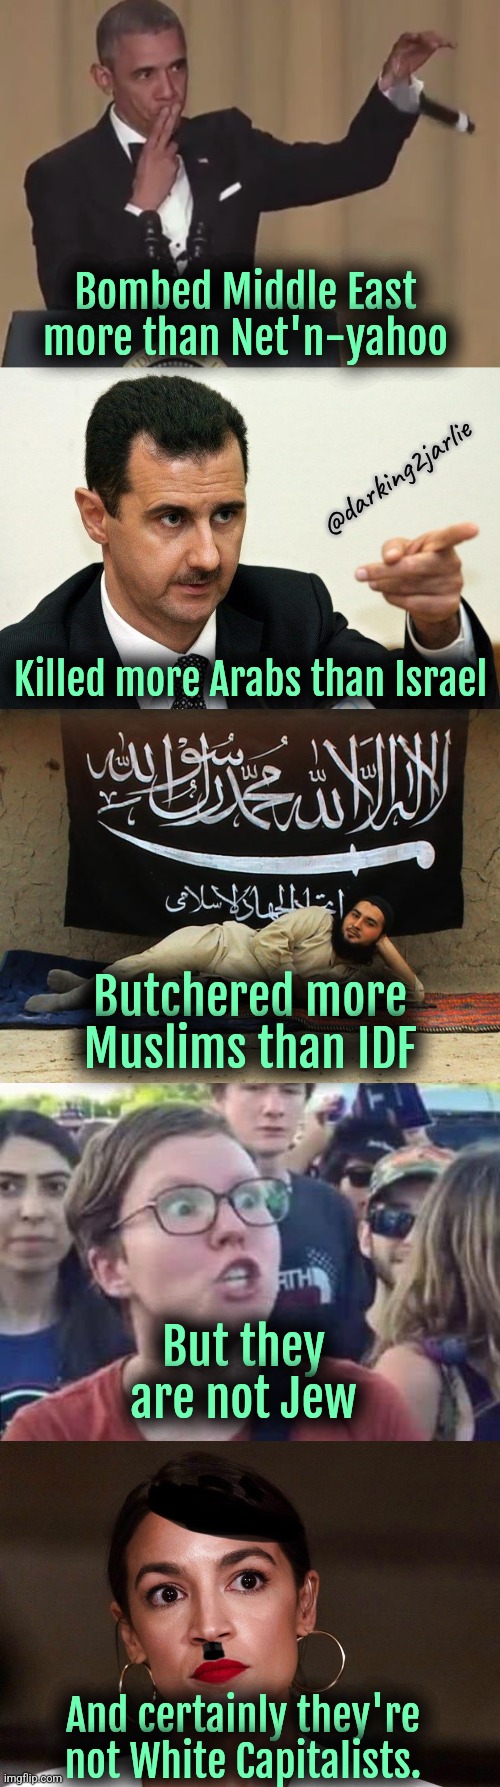 Jew white. White bad. | Bombed Middle East more than Net'n-yahoo; @darking2jarlie; Killed more Arabs than Israel; Butchered more Muslims than IDF; But they are not Jew; And certainly they're not White Capitalists. | image tagged in dictator dem,liberal logic,liberalism,israel,muslims,socialism | made w/ Imgflip meme maker